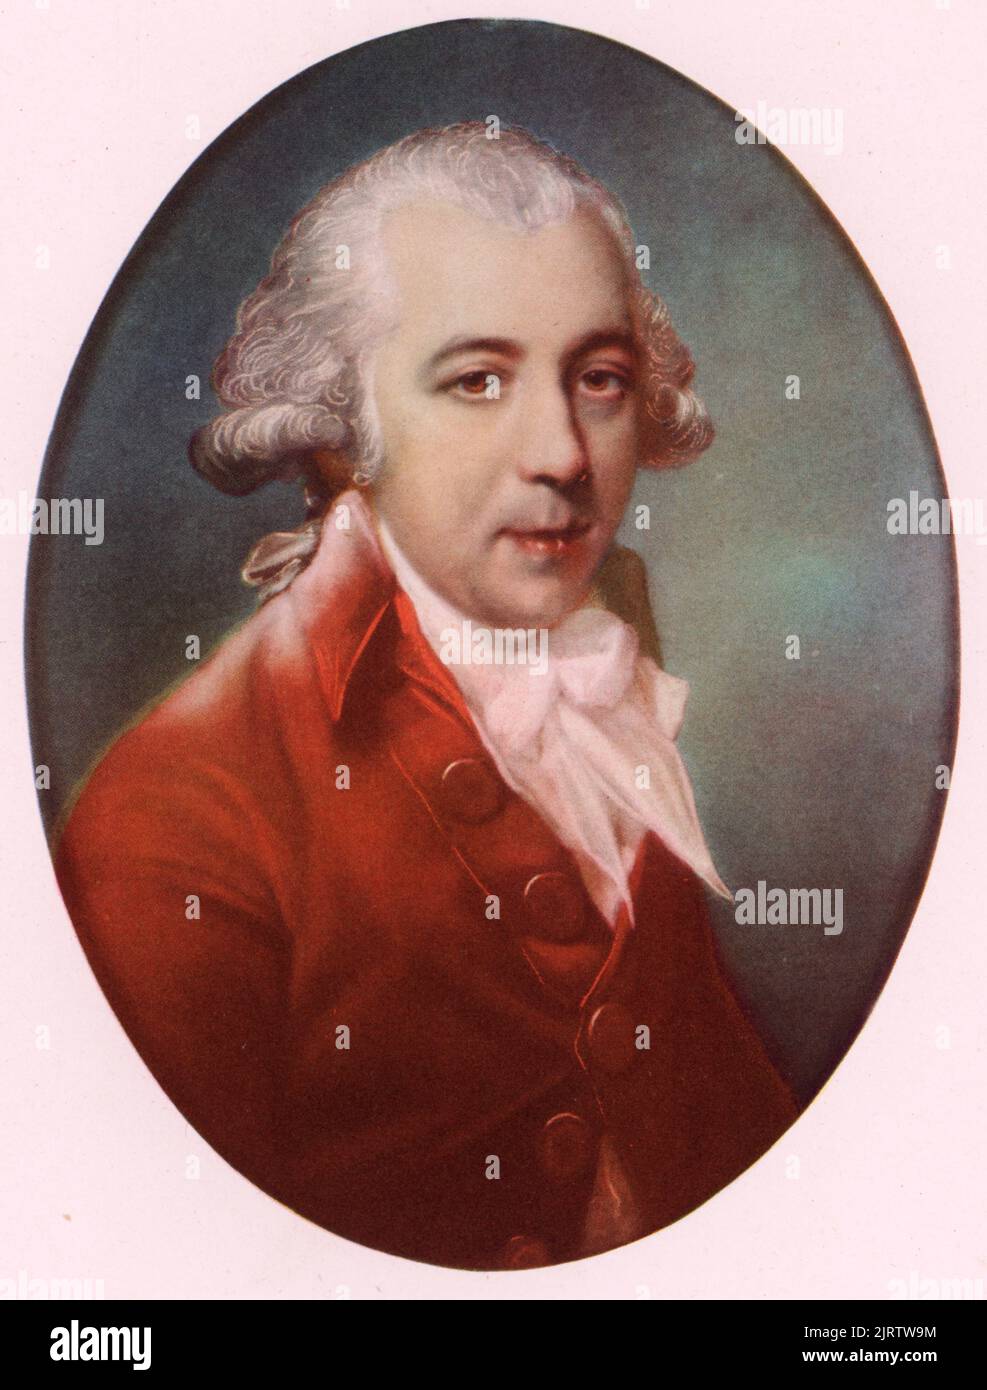 Richard Brinsley Sheridan (1751-1816), 1788. By John Russell (1745-1806). Irish satirist, a politician, a playwright, poet, and one time owner of the London Theatre Royal, Drury Lane. Stock Photo